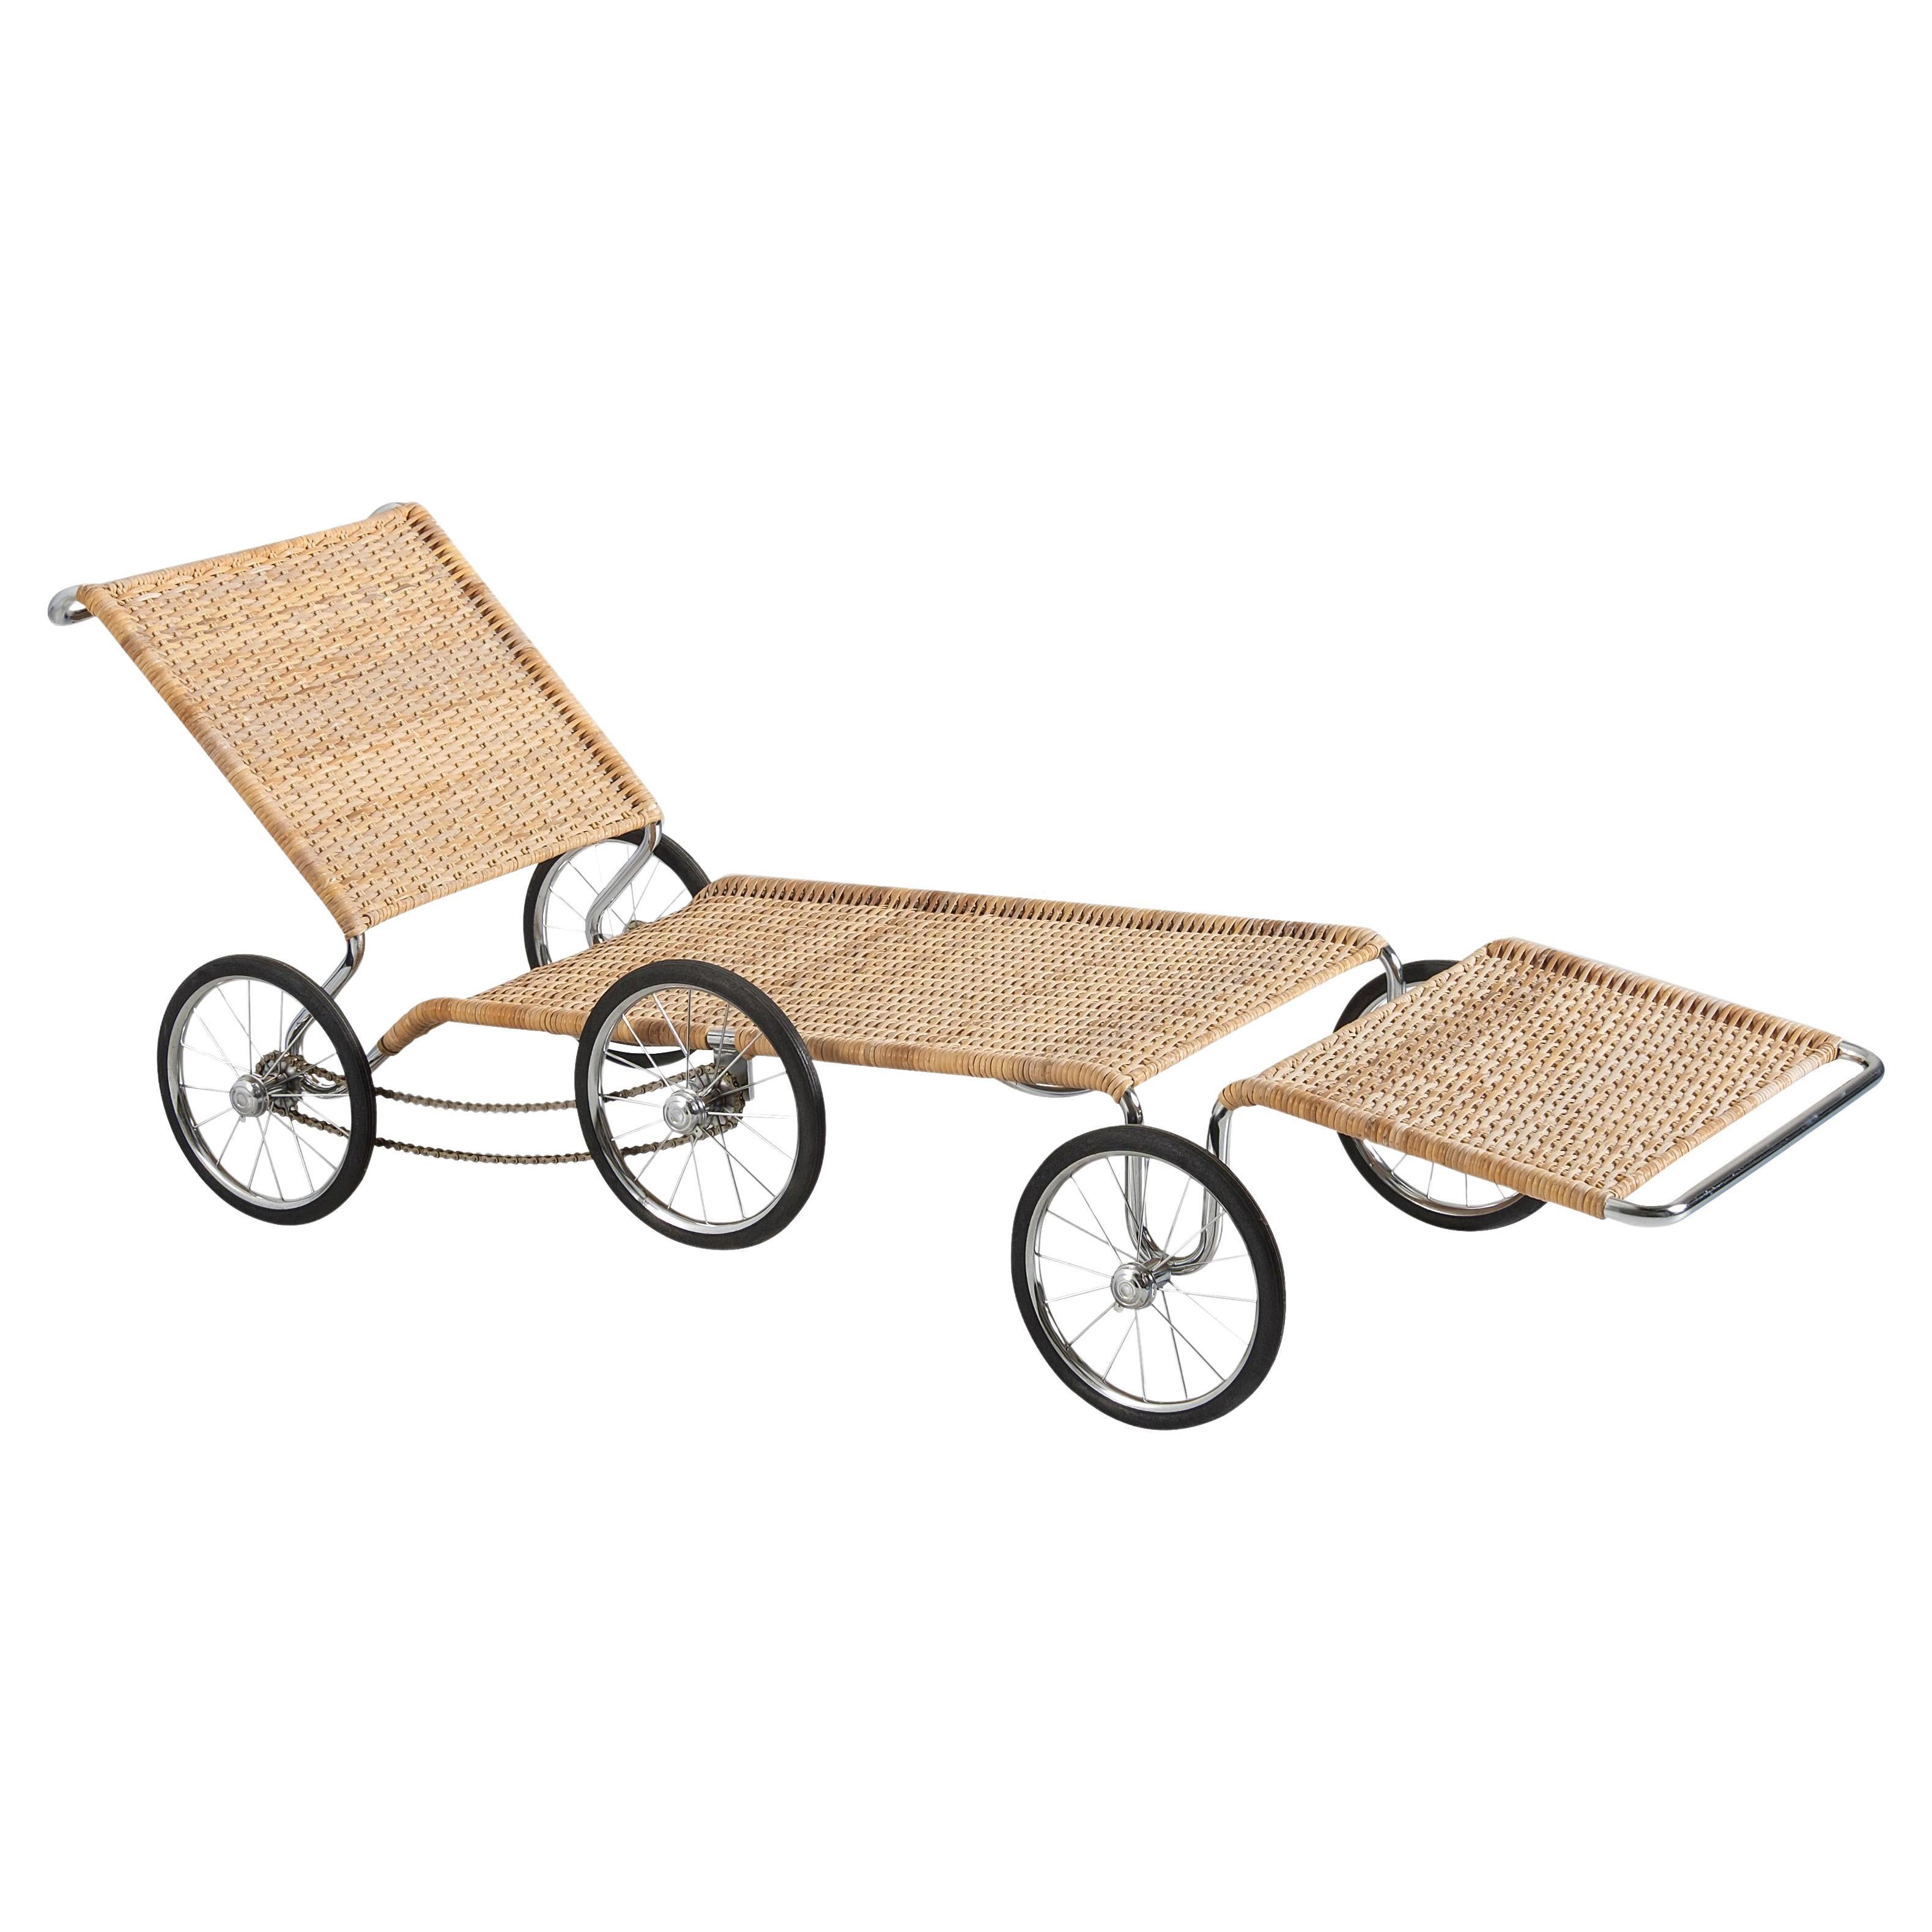 Marcel Breuer for Tecta 'The Mobile Manifesto' Chaise Longue in Cane Wicker 